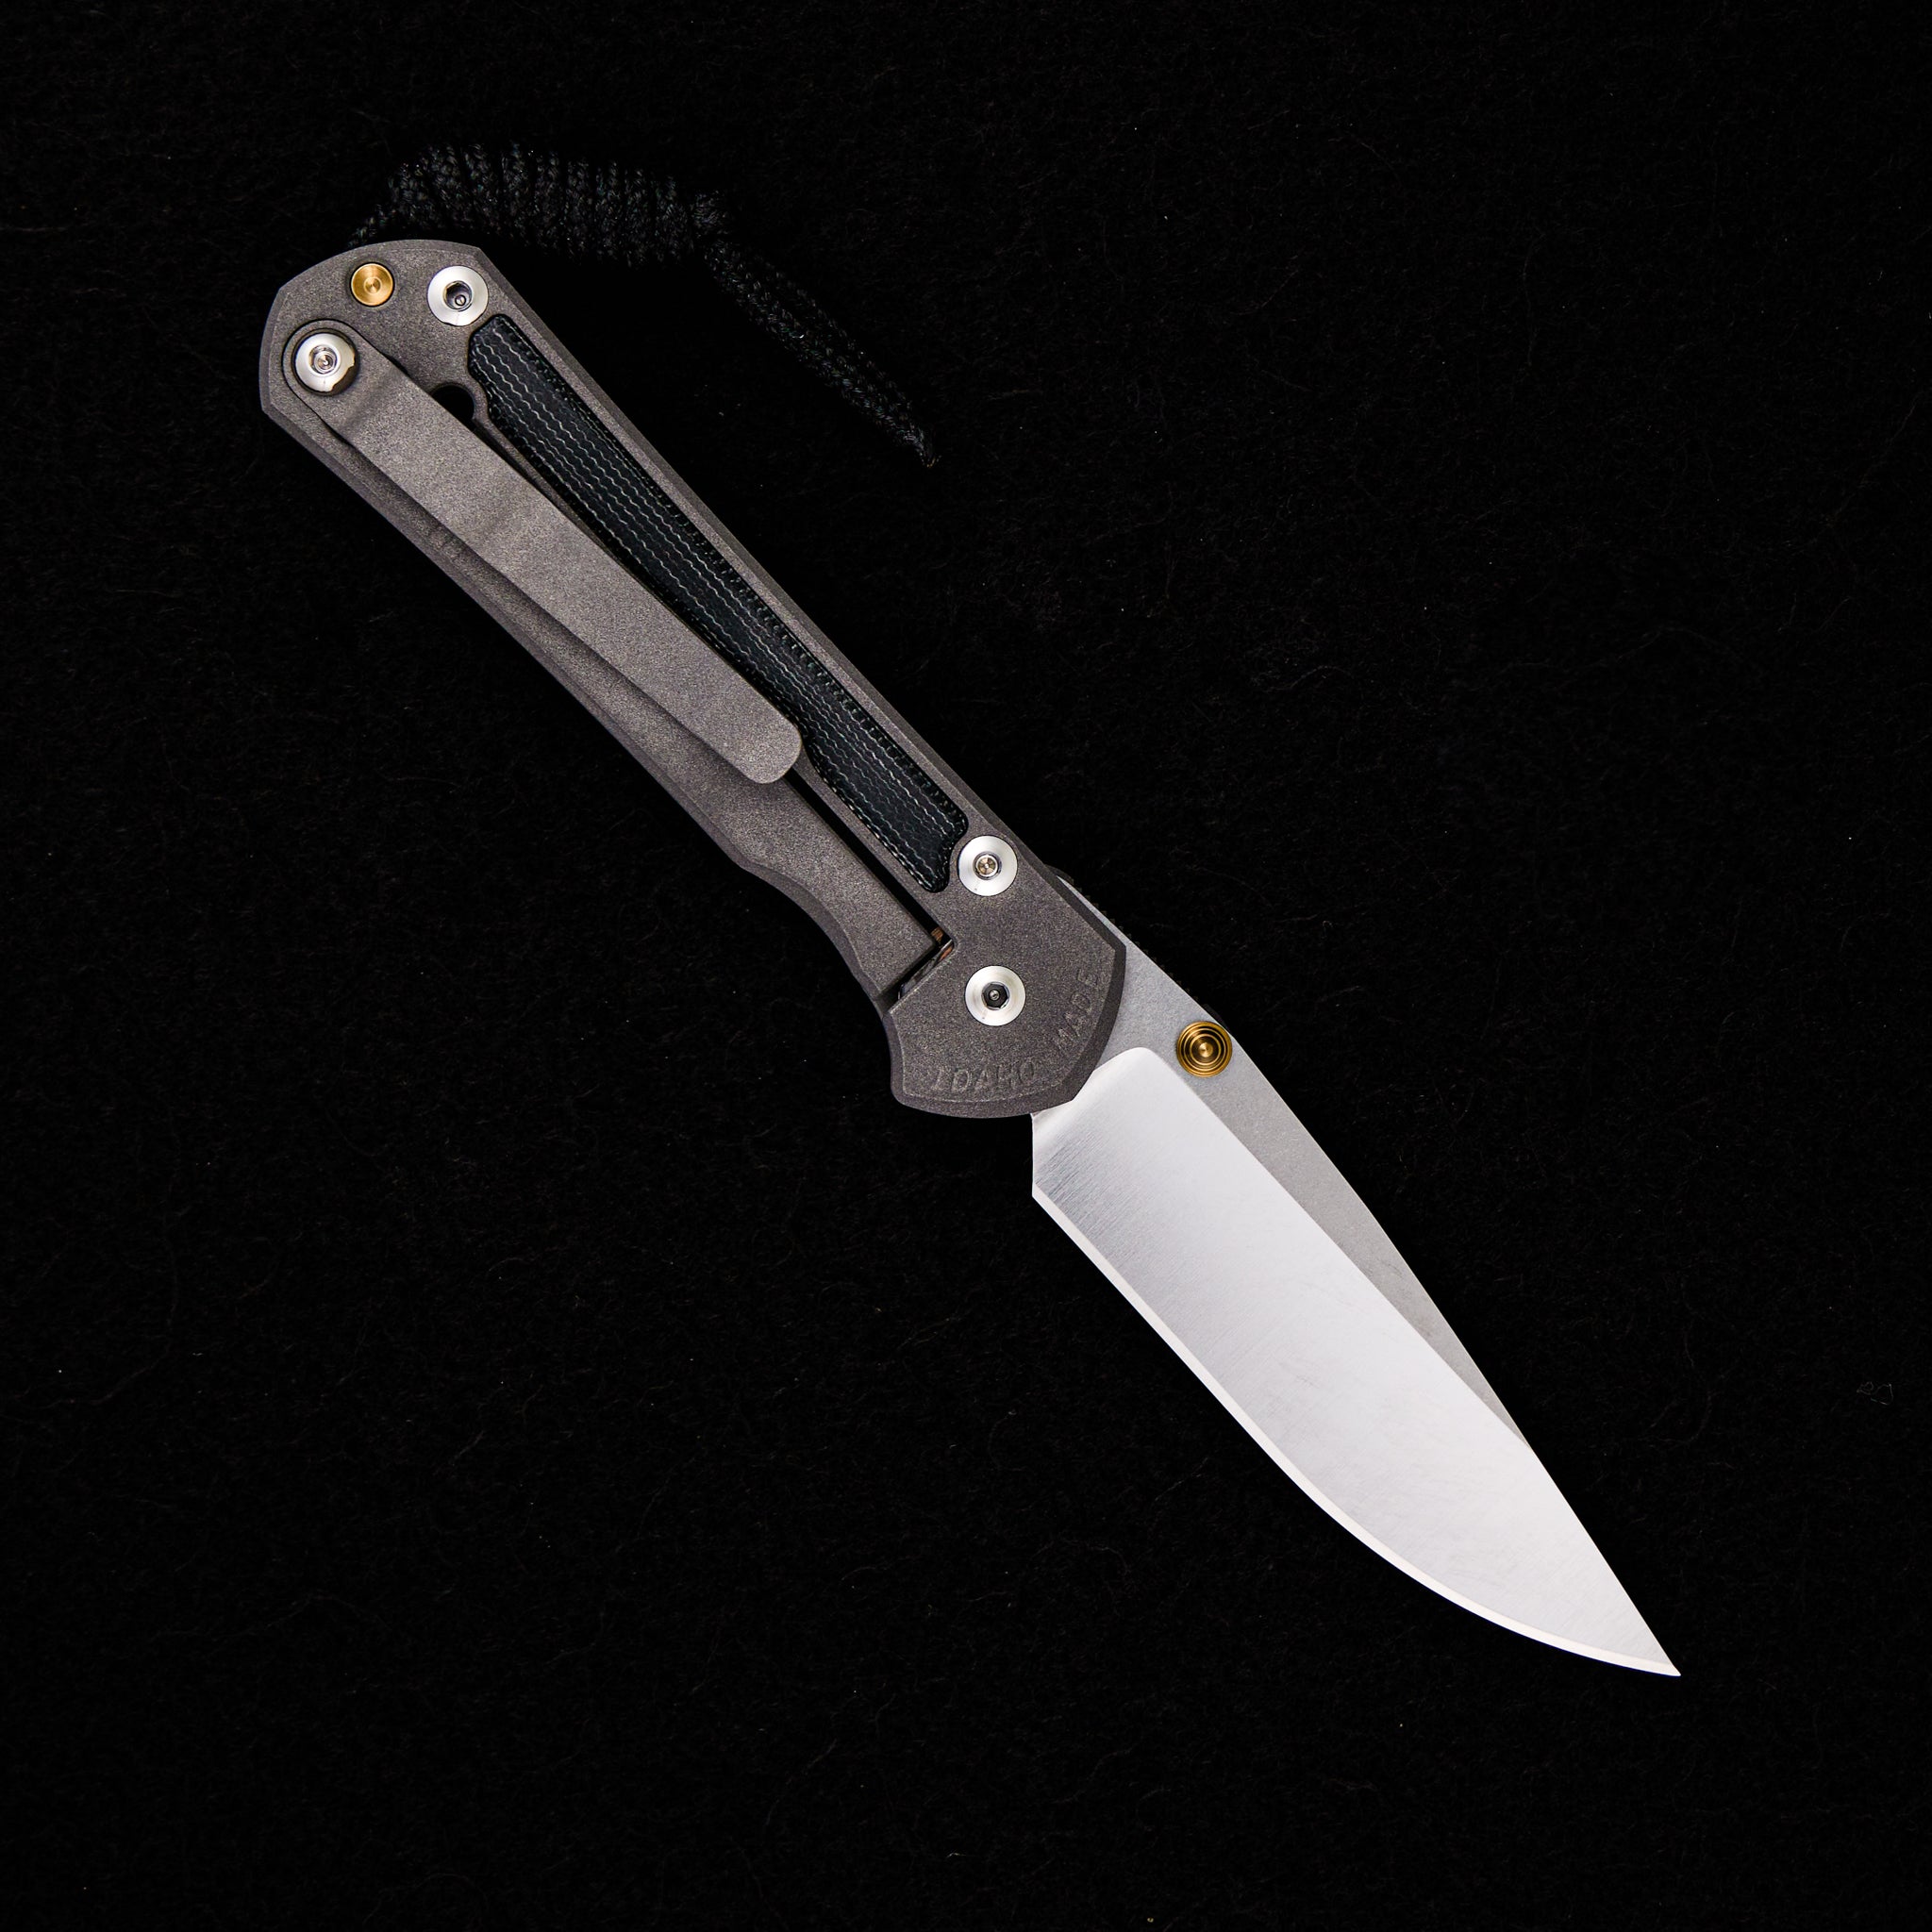 CHRIS REEVE SMALL SEBENZA 31 BLACK CANVAS MICARTA INLAY – POLISHED CPM MAGNACUT BLADE – GOLD DOUBLE THUMB LUGS